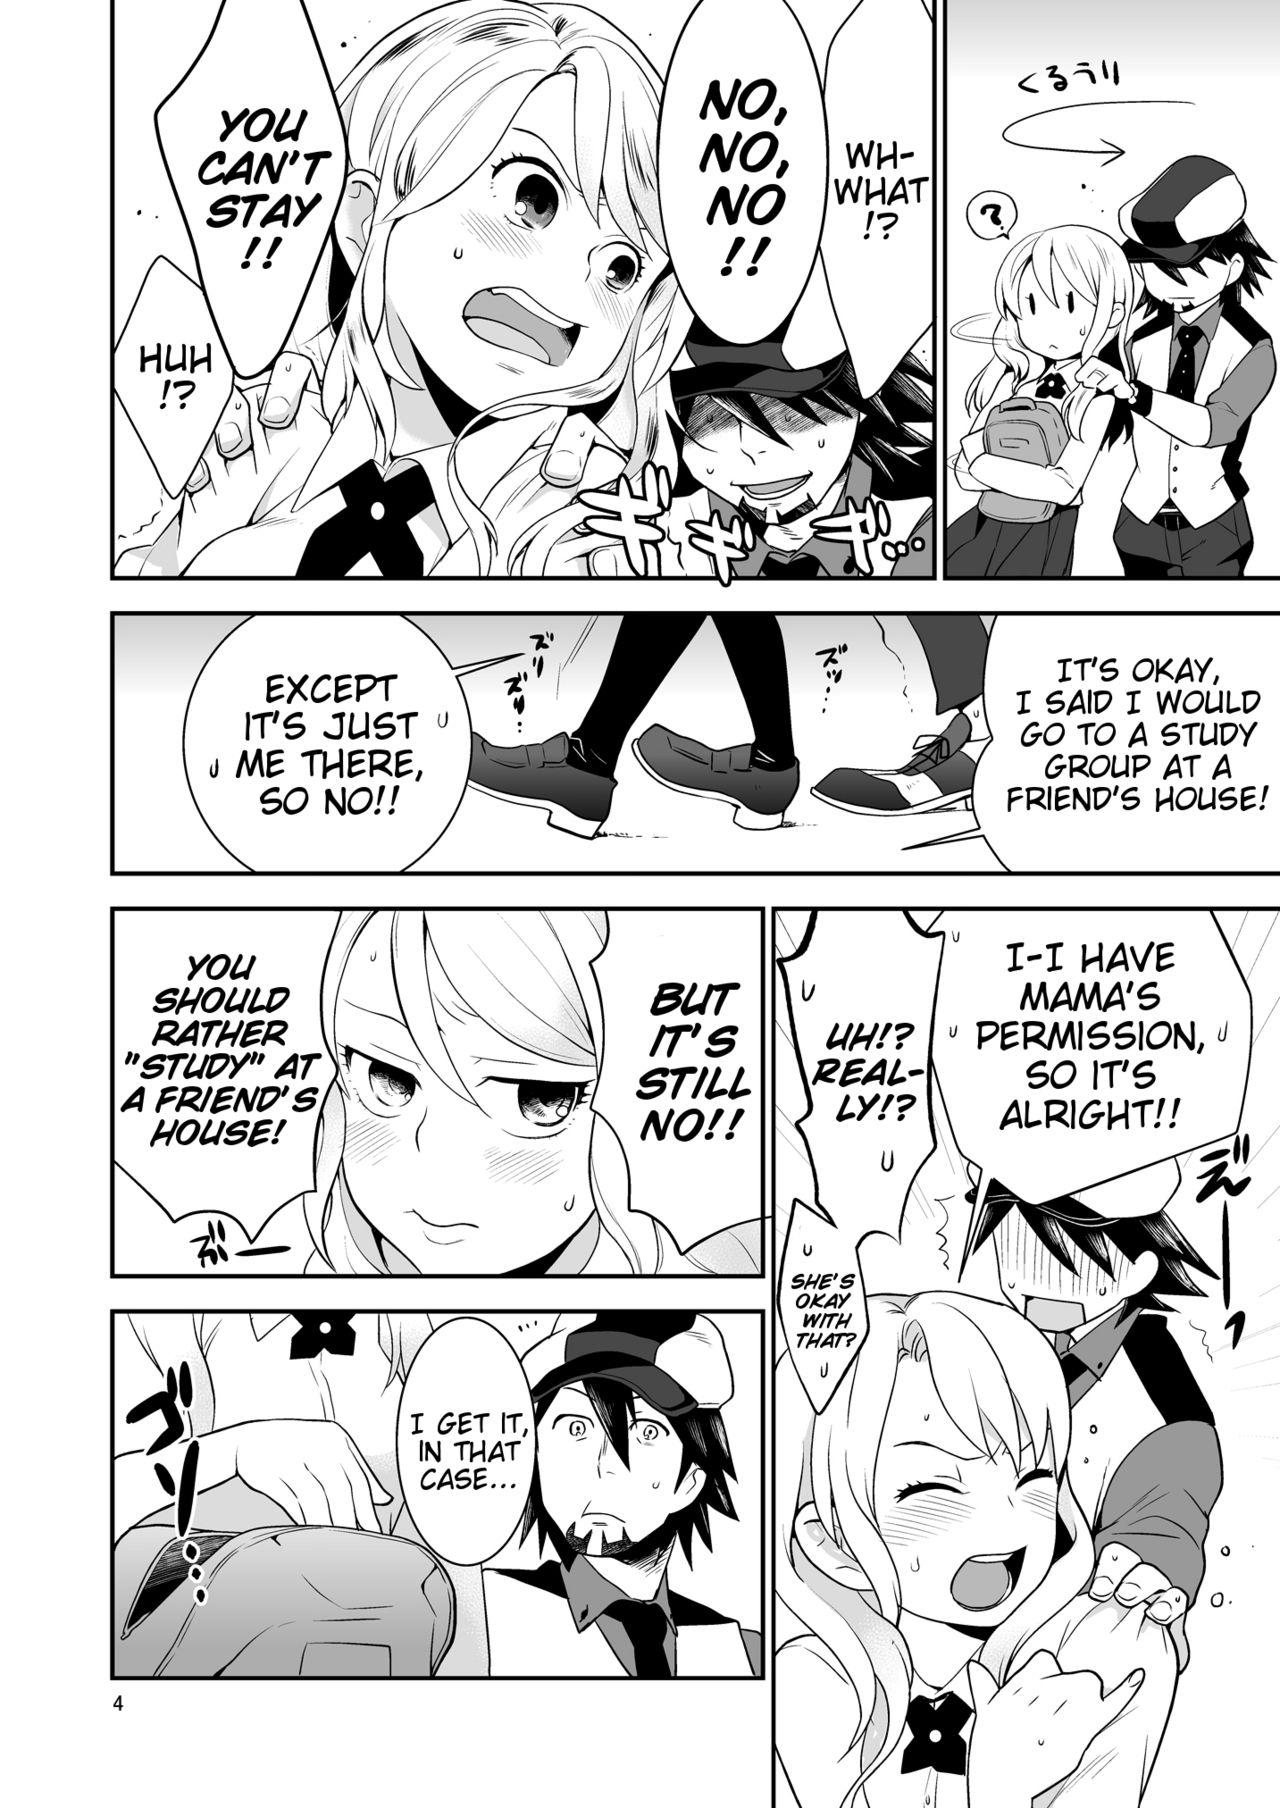 Groupsex Sukinandatteba | I love you - Tiger and bunny Storyline - Page 3